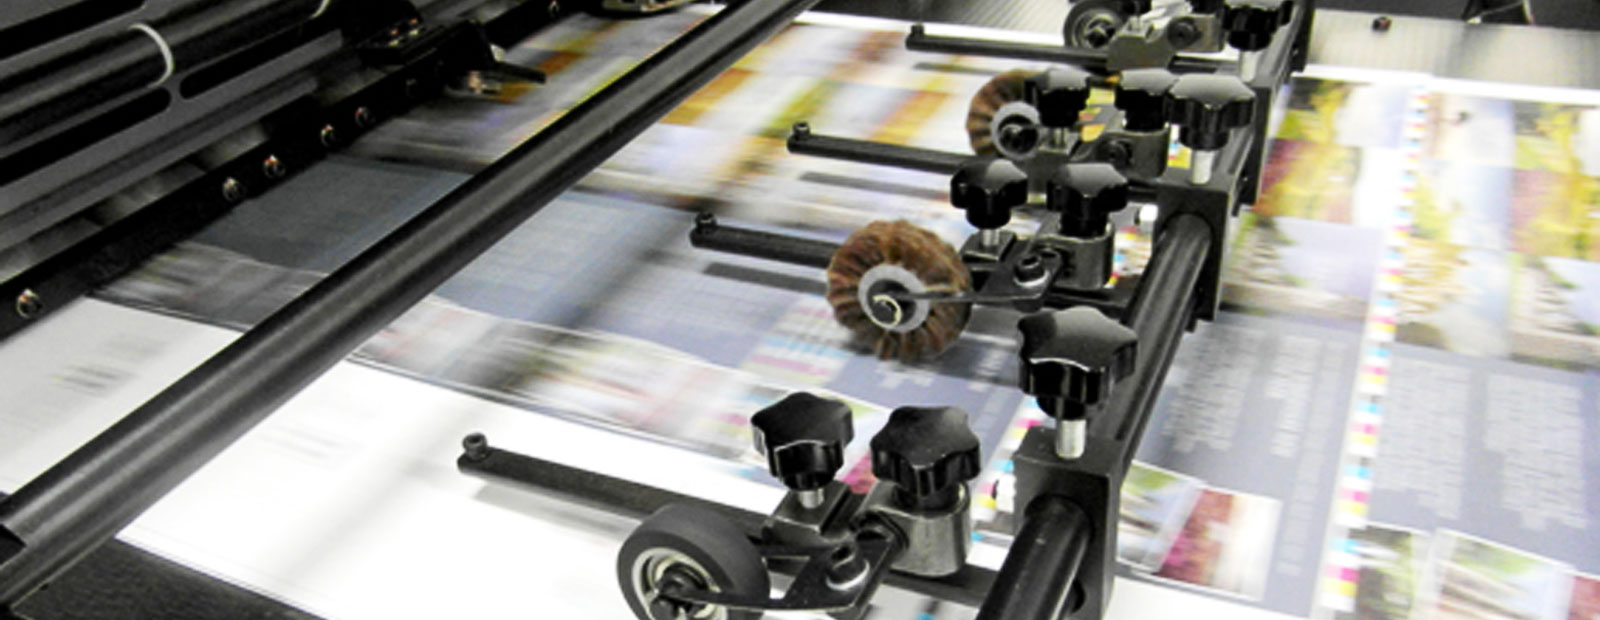 A cost effective solution for all of your printing requirements